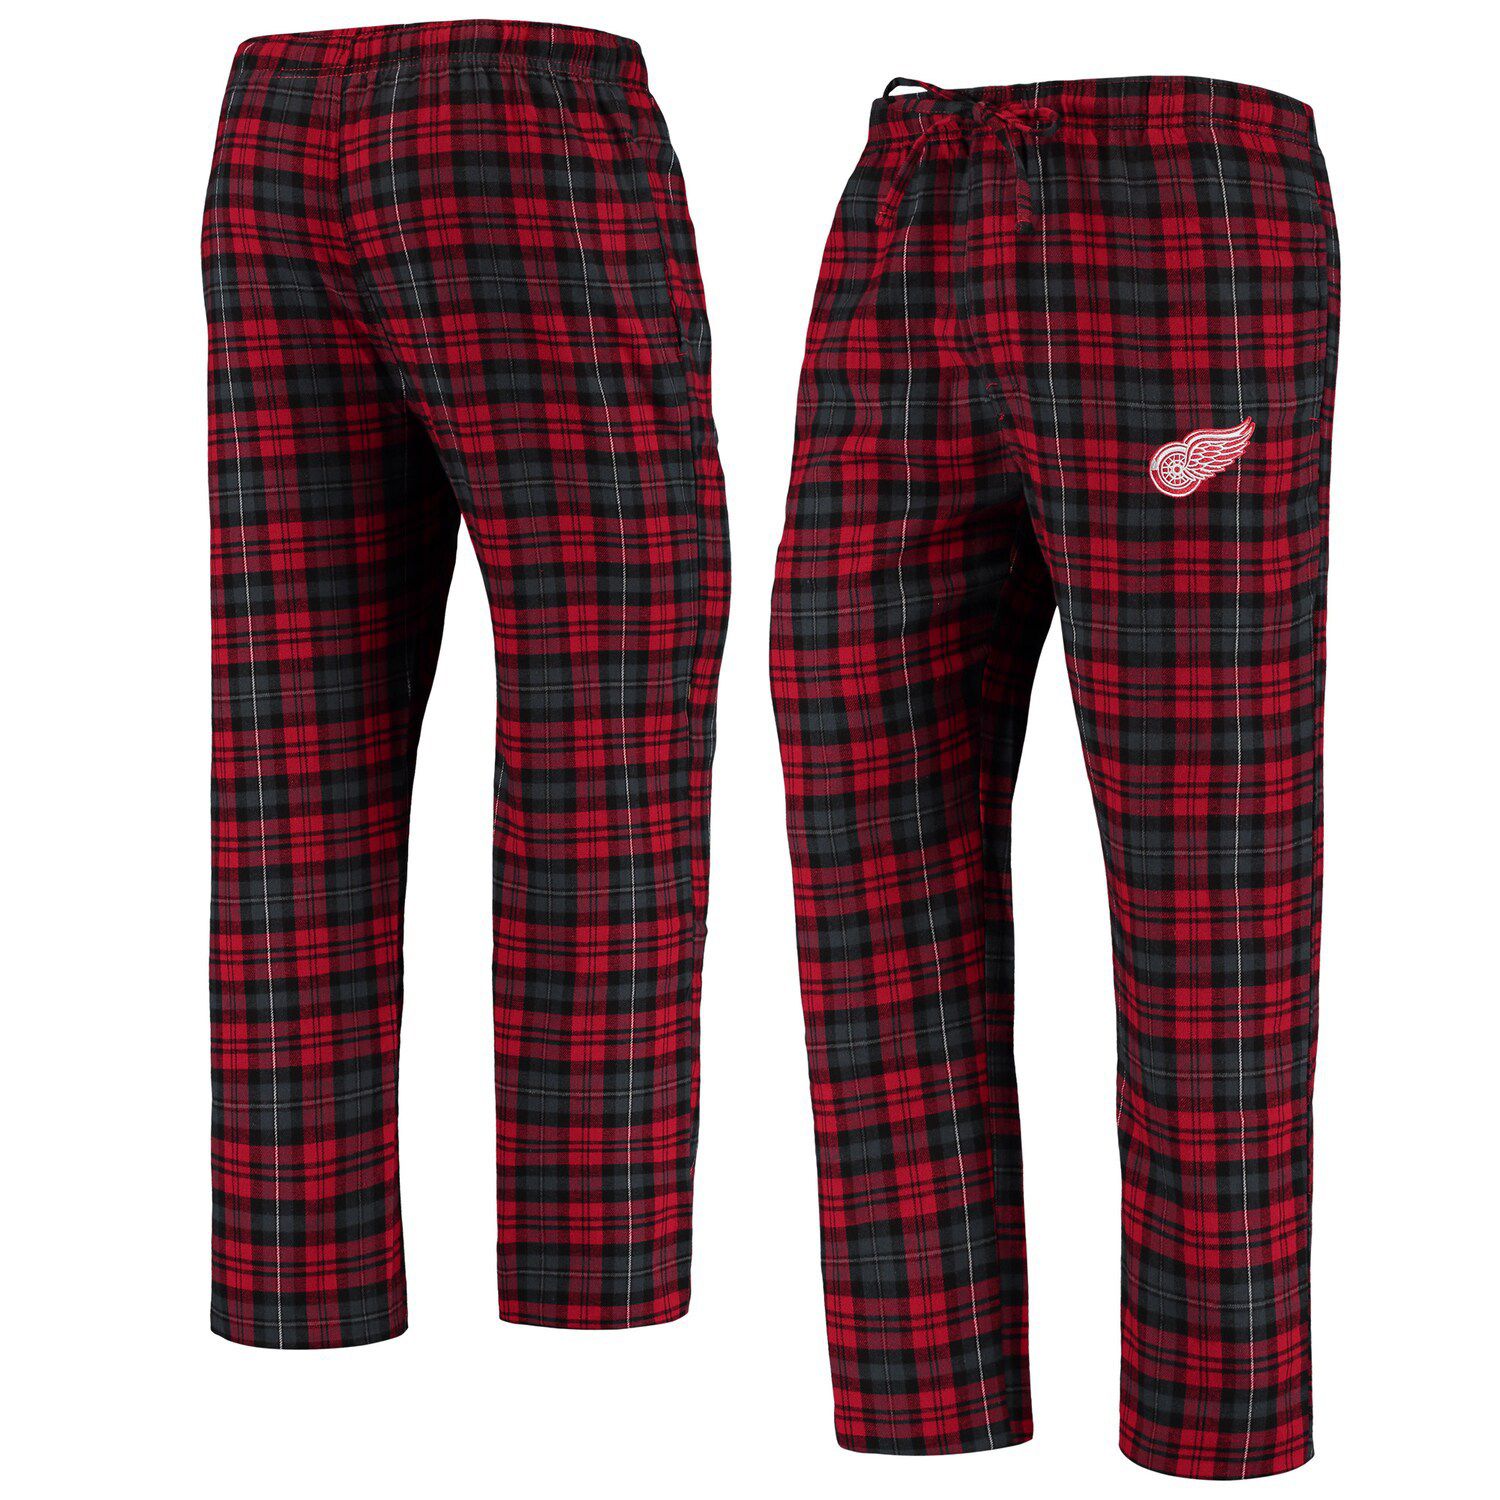 red and black flannel pants